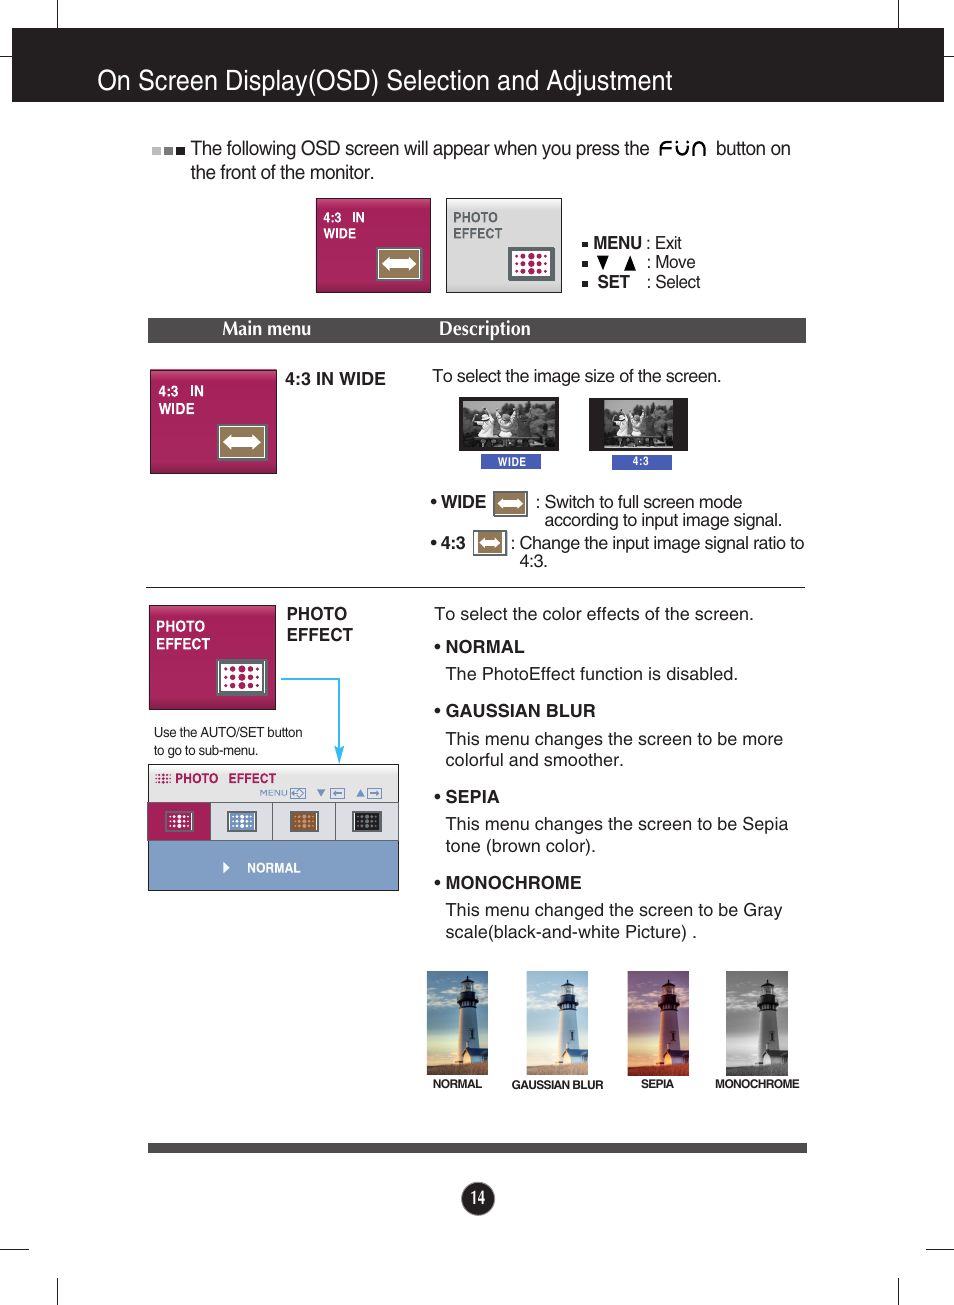 On screen display(osd) selection and adjustment | LG W1943TB-PF User Manual | Page 15 / 34